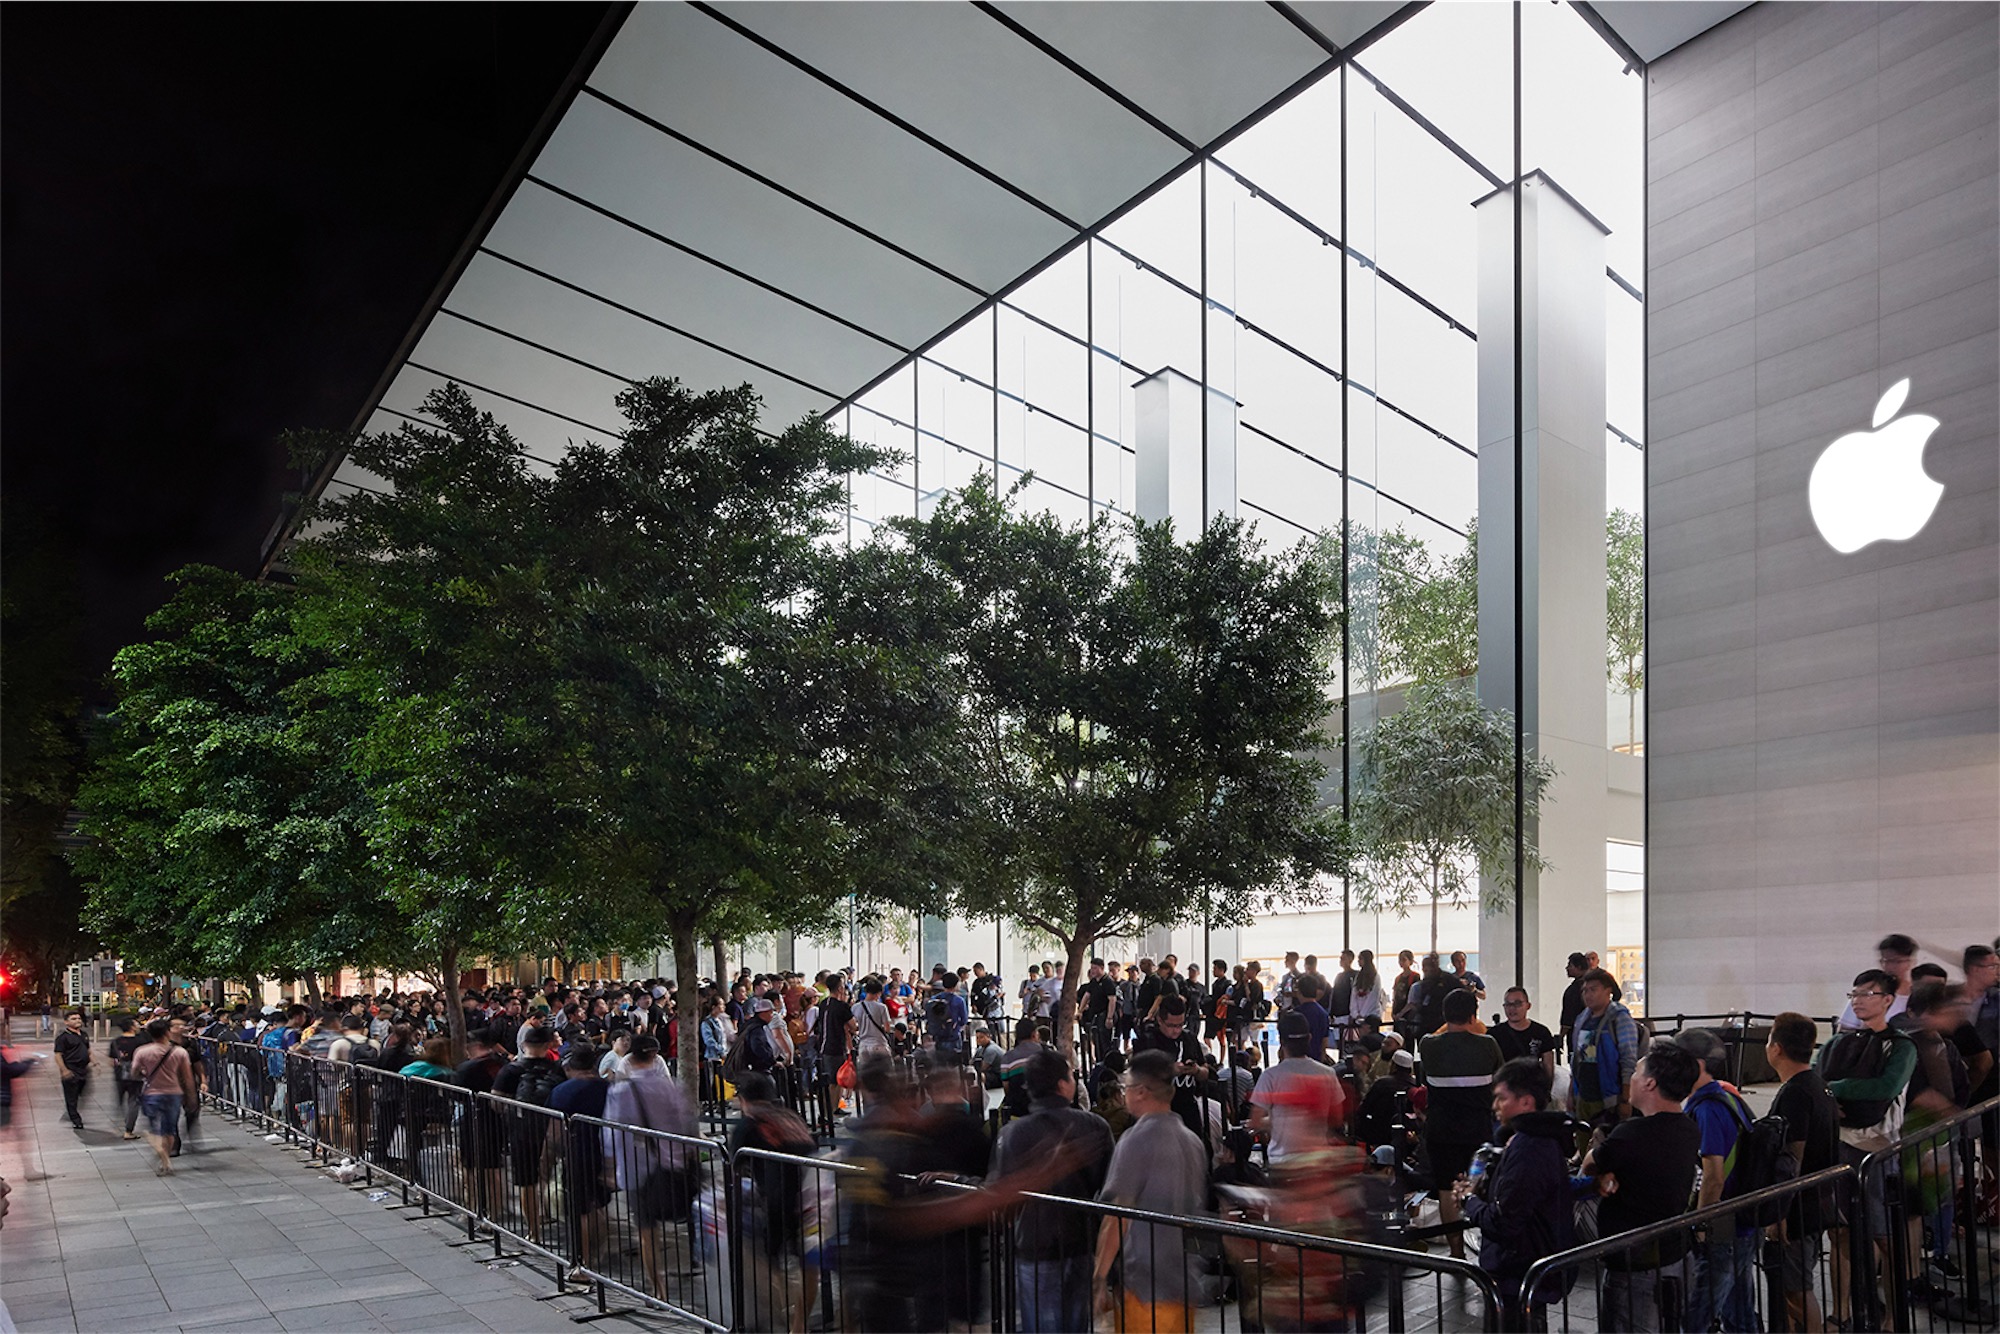 Launch of new iPhones and Apple Watch in Apple stores